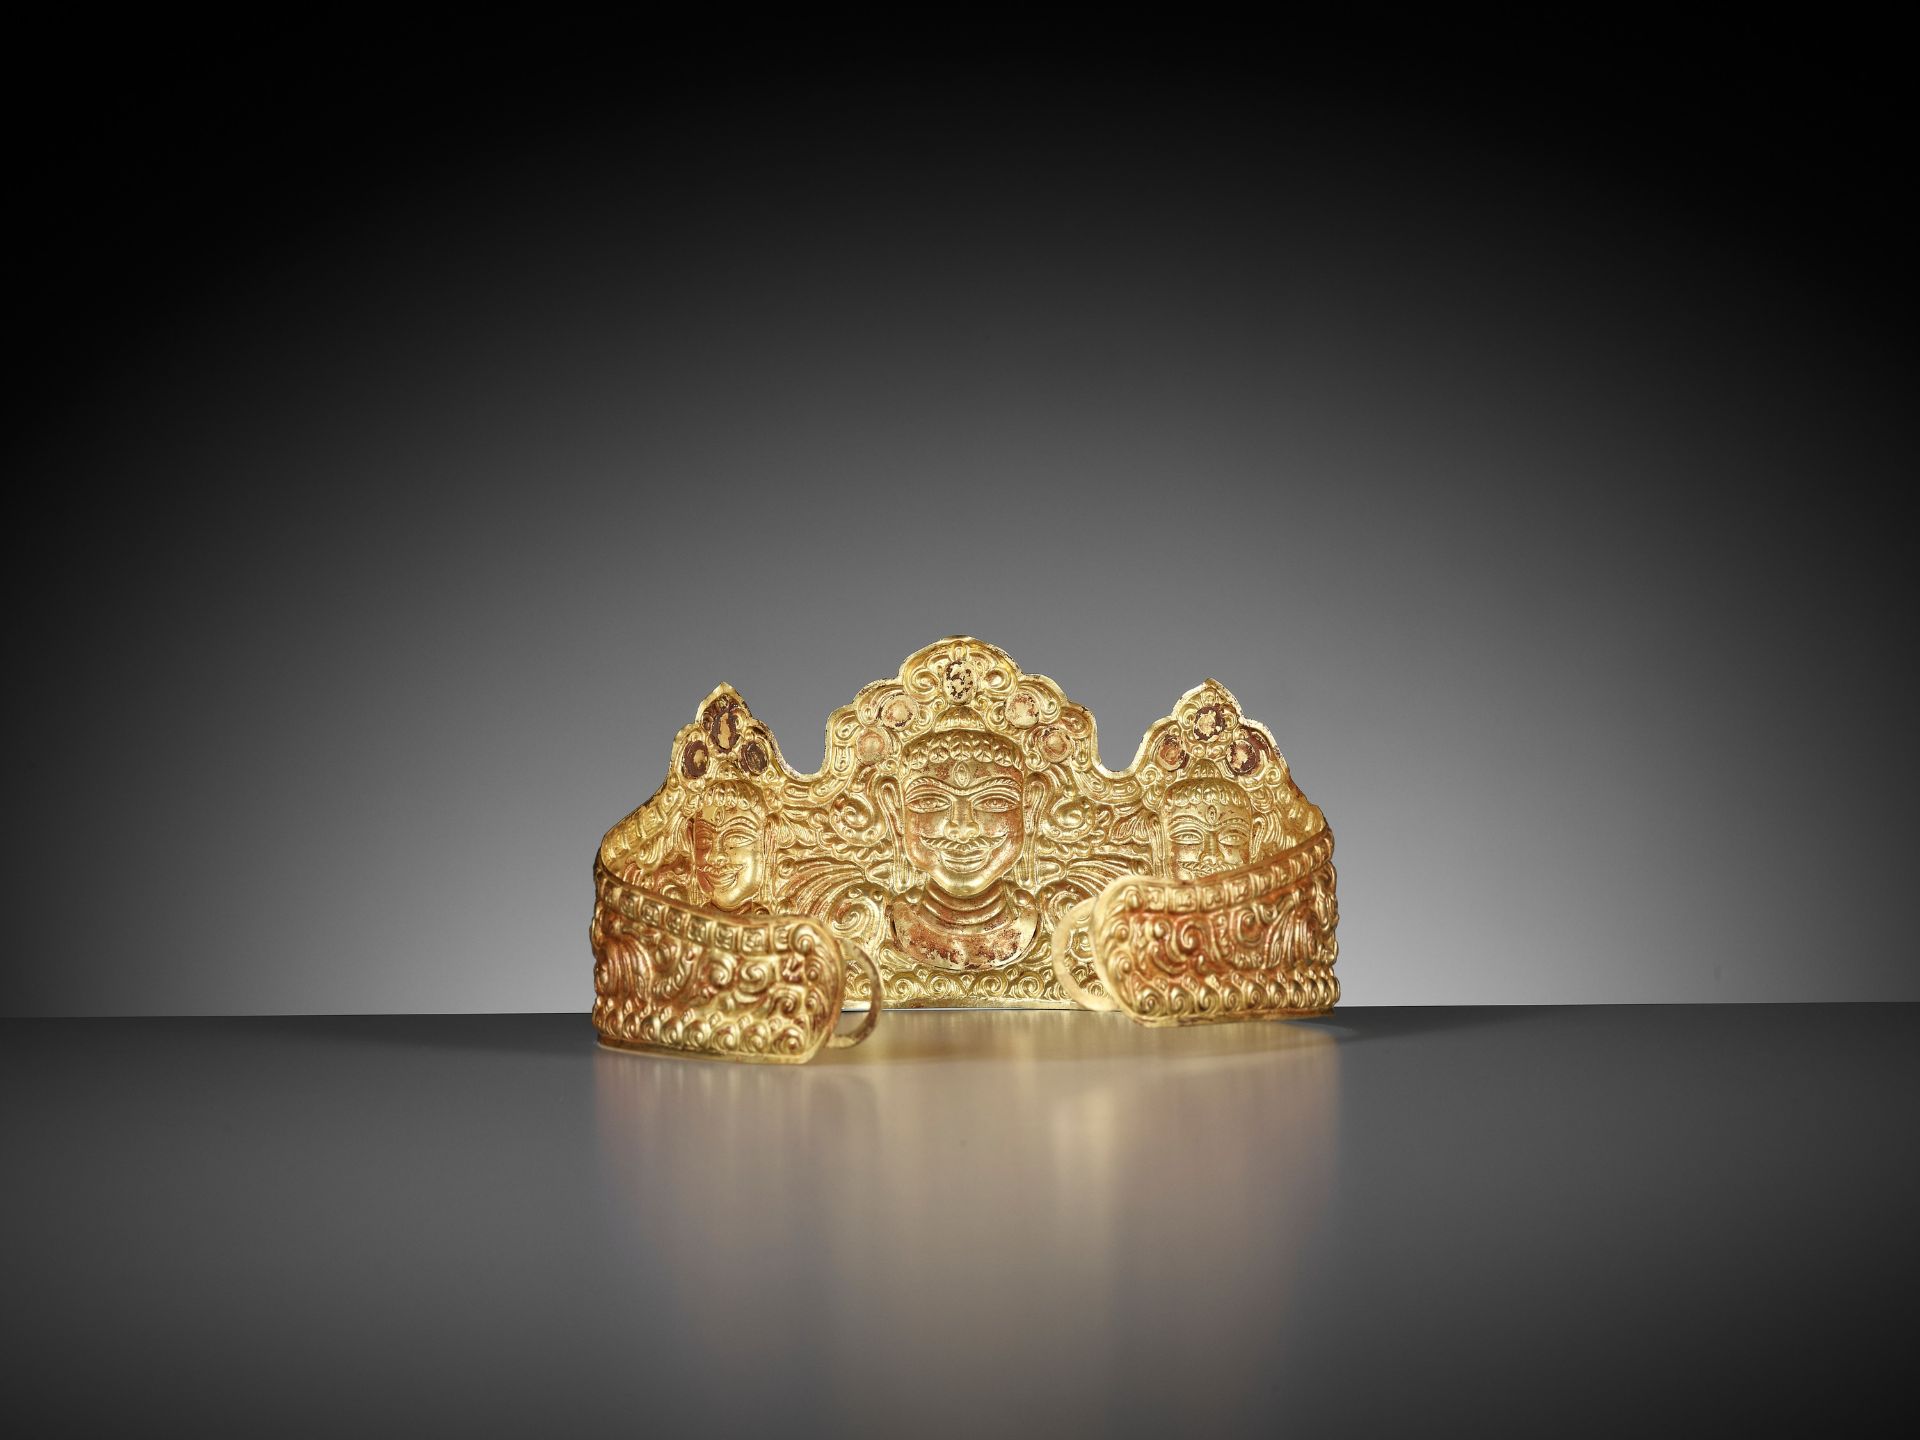 AN IMPORTANT CHAM GOLD REPOUSSE AND GEMSTONE-SET DIADEM, CHAM PERIOD - Image 10 of 11